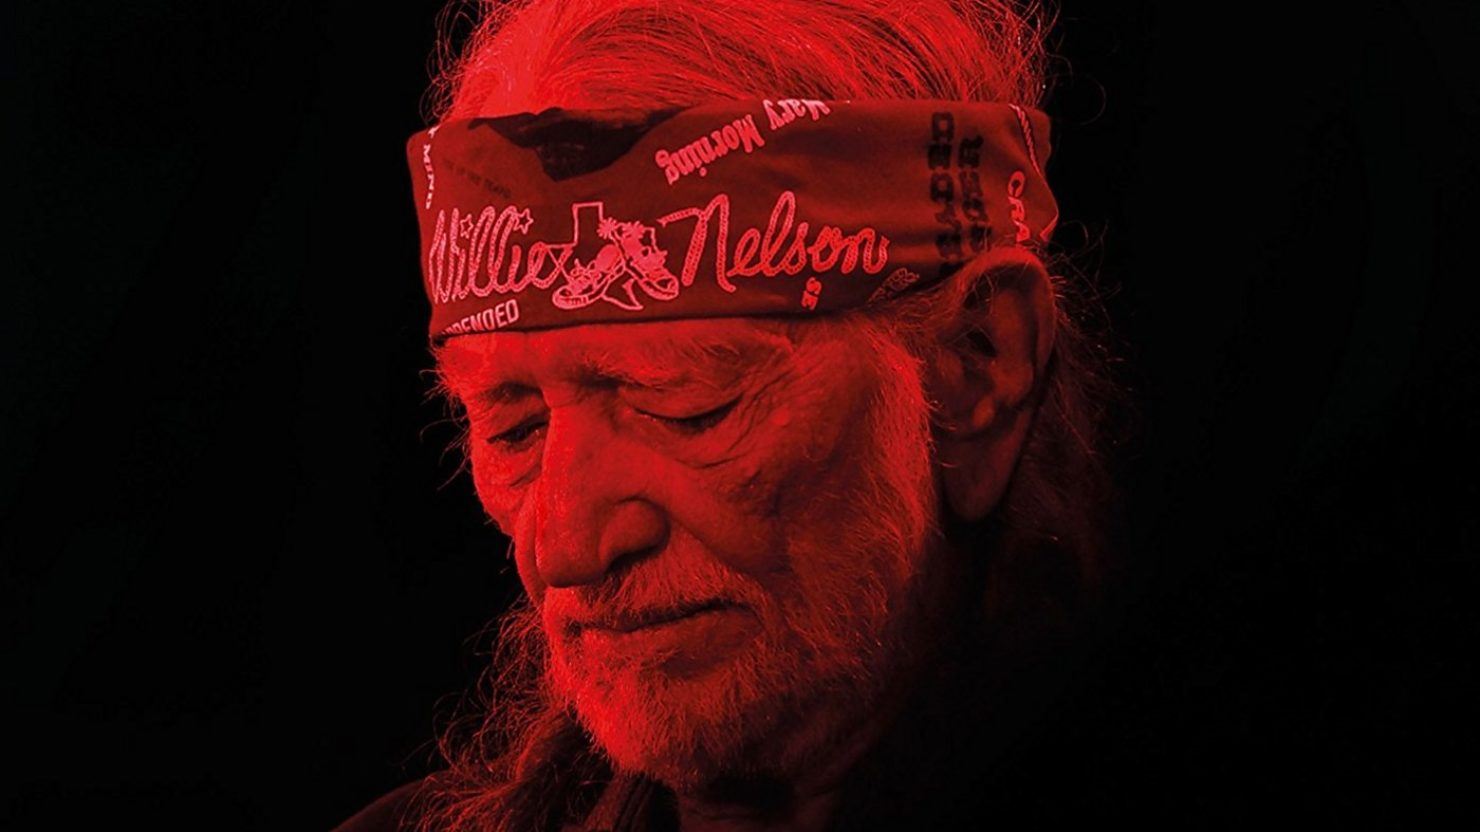 Strictly Country Magazine Willie Nelson title